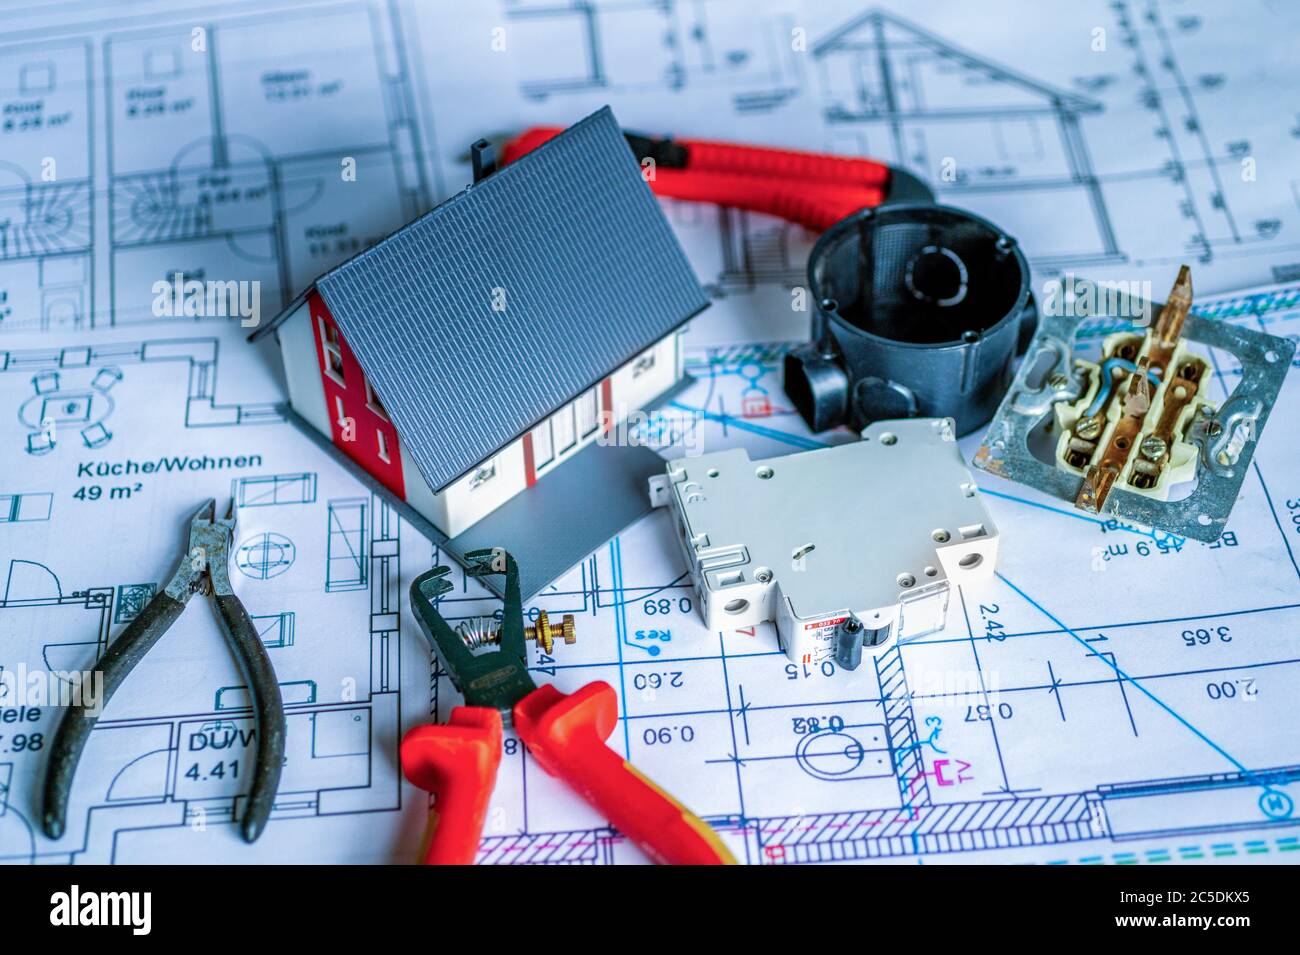 Electrical planning for a house Stock Photo